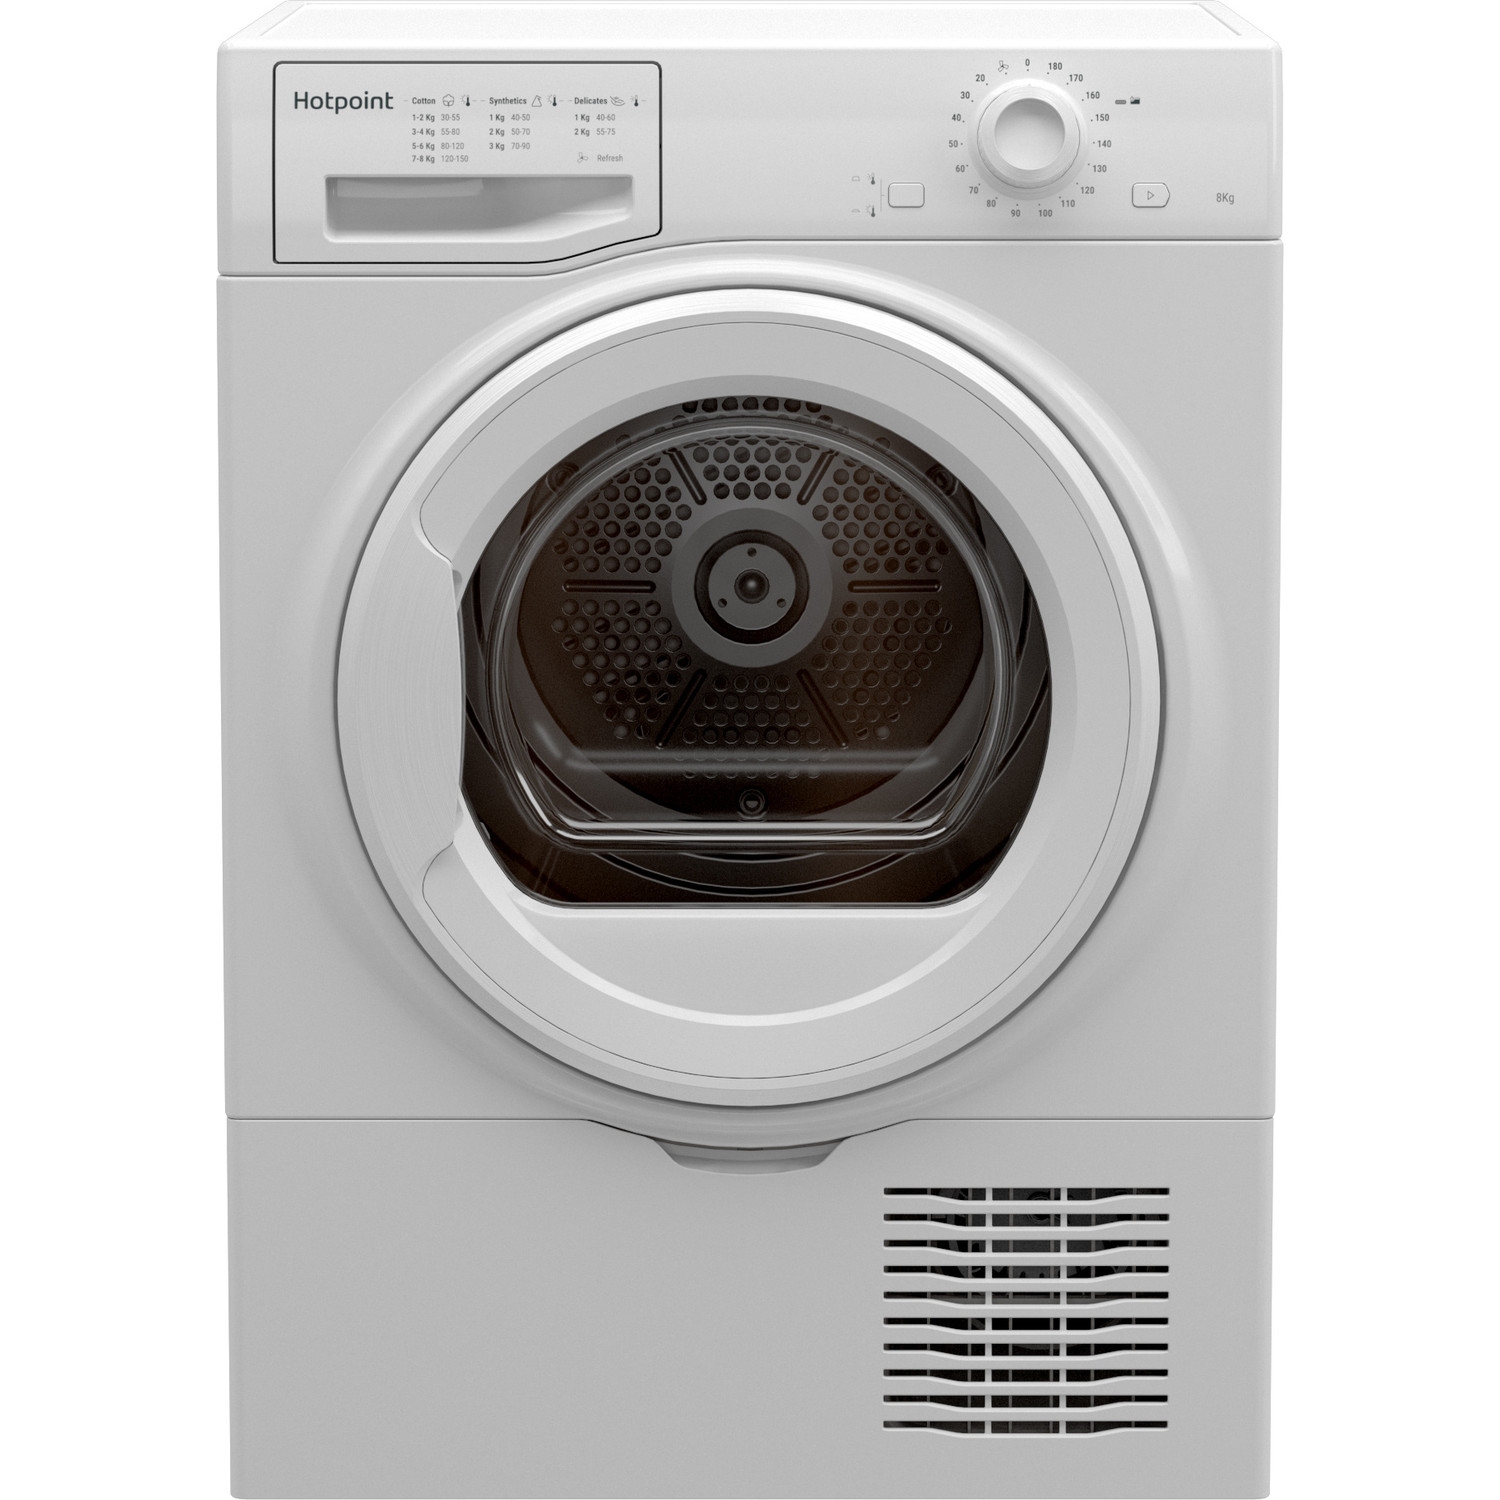 Hotpoint H2D81WEUK 8kg Condensor Tumble Dryer - White - 5